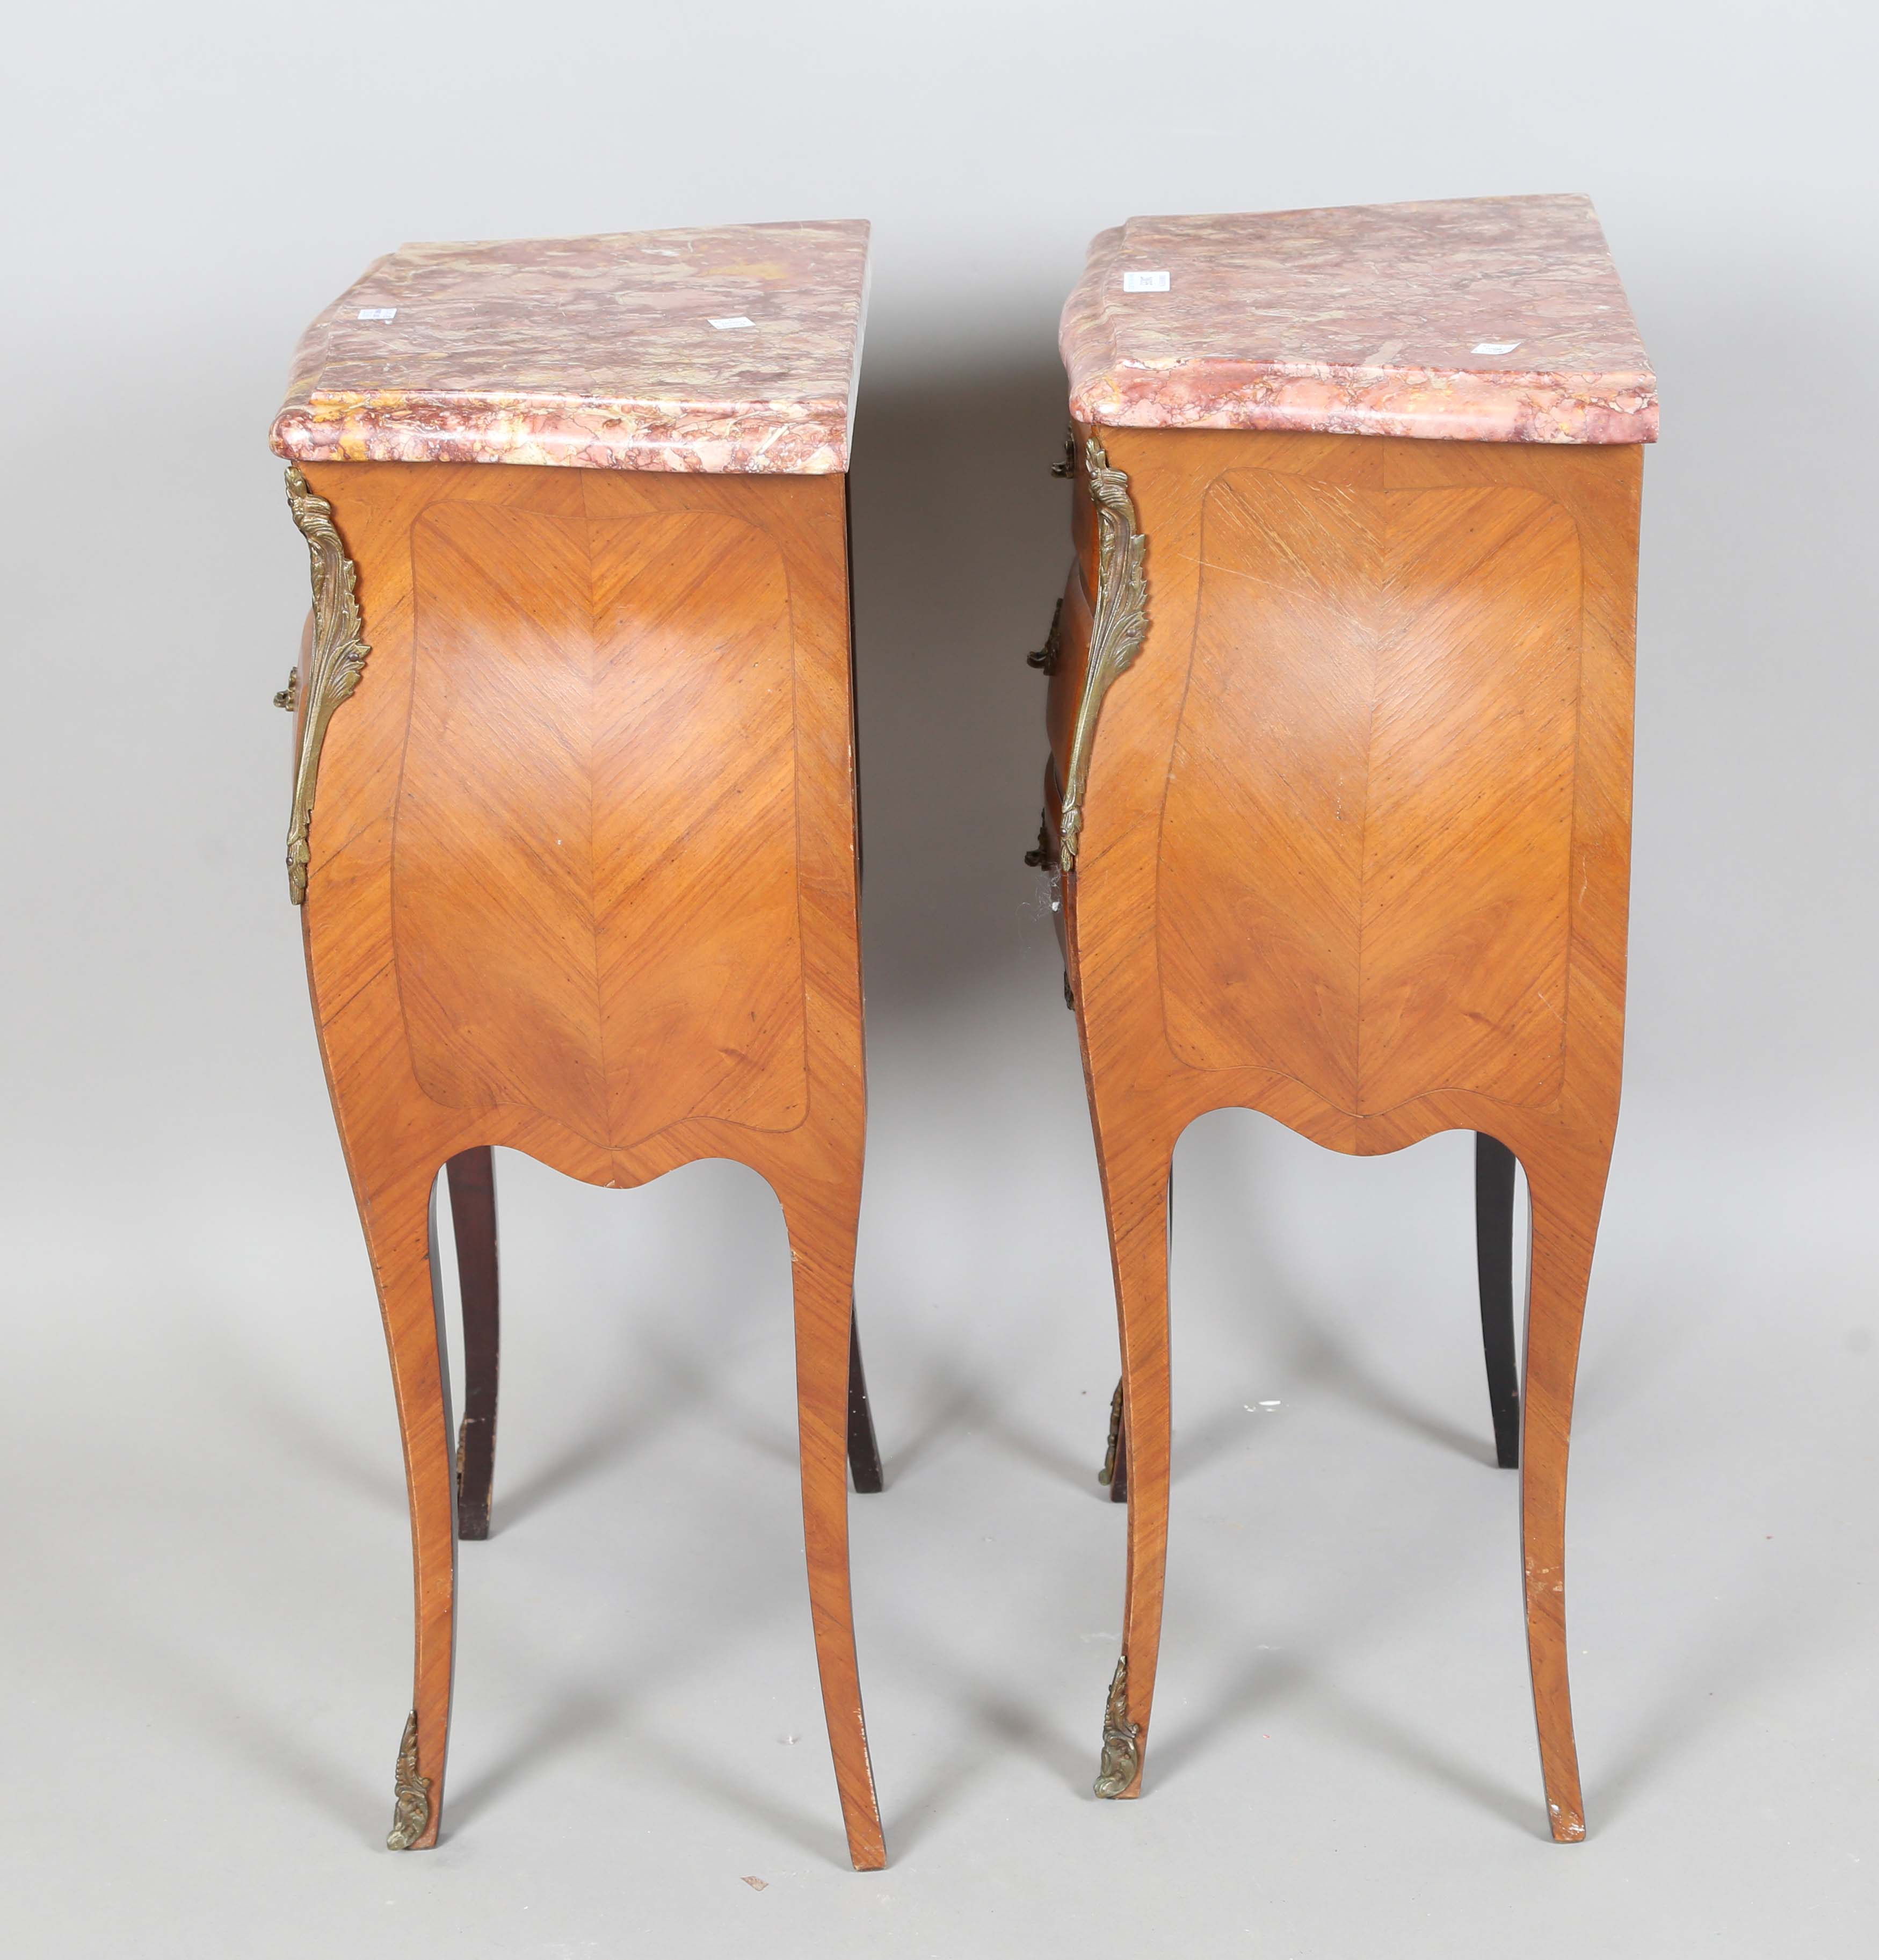 A pair of 20th century French kingwood marble-topped bedside chests with applied gilt metal - Image 2 of 7